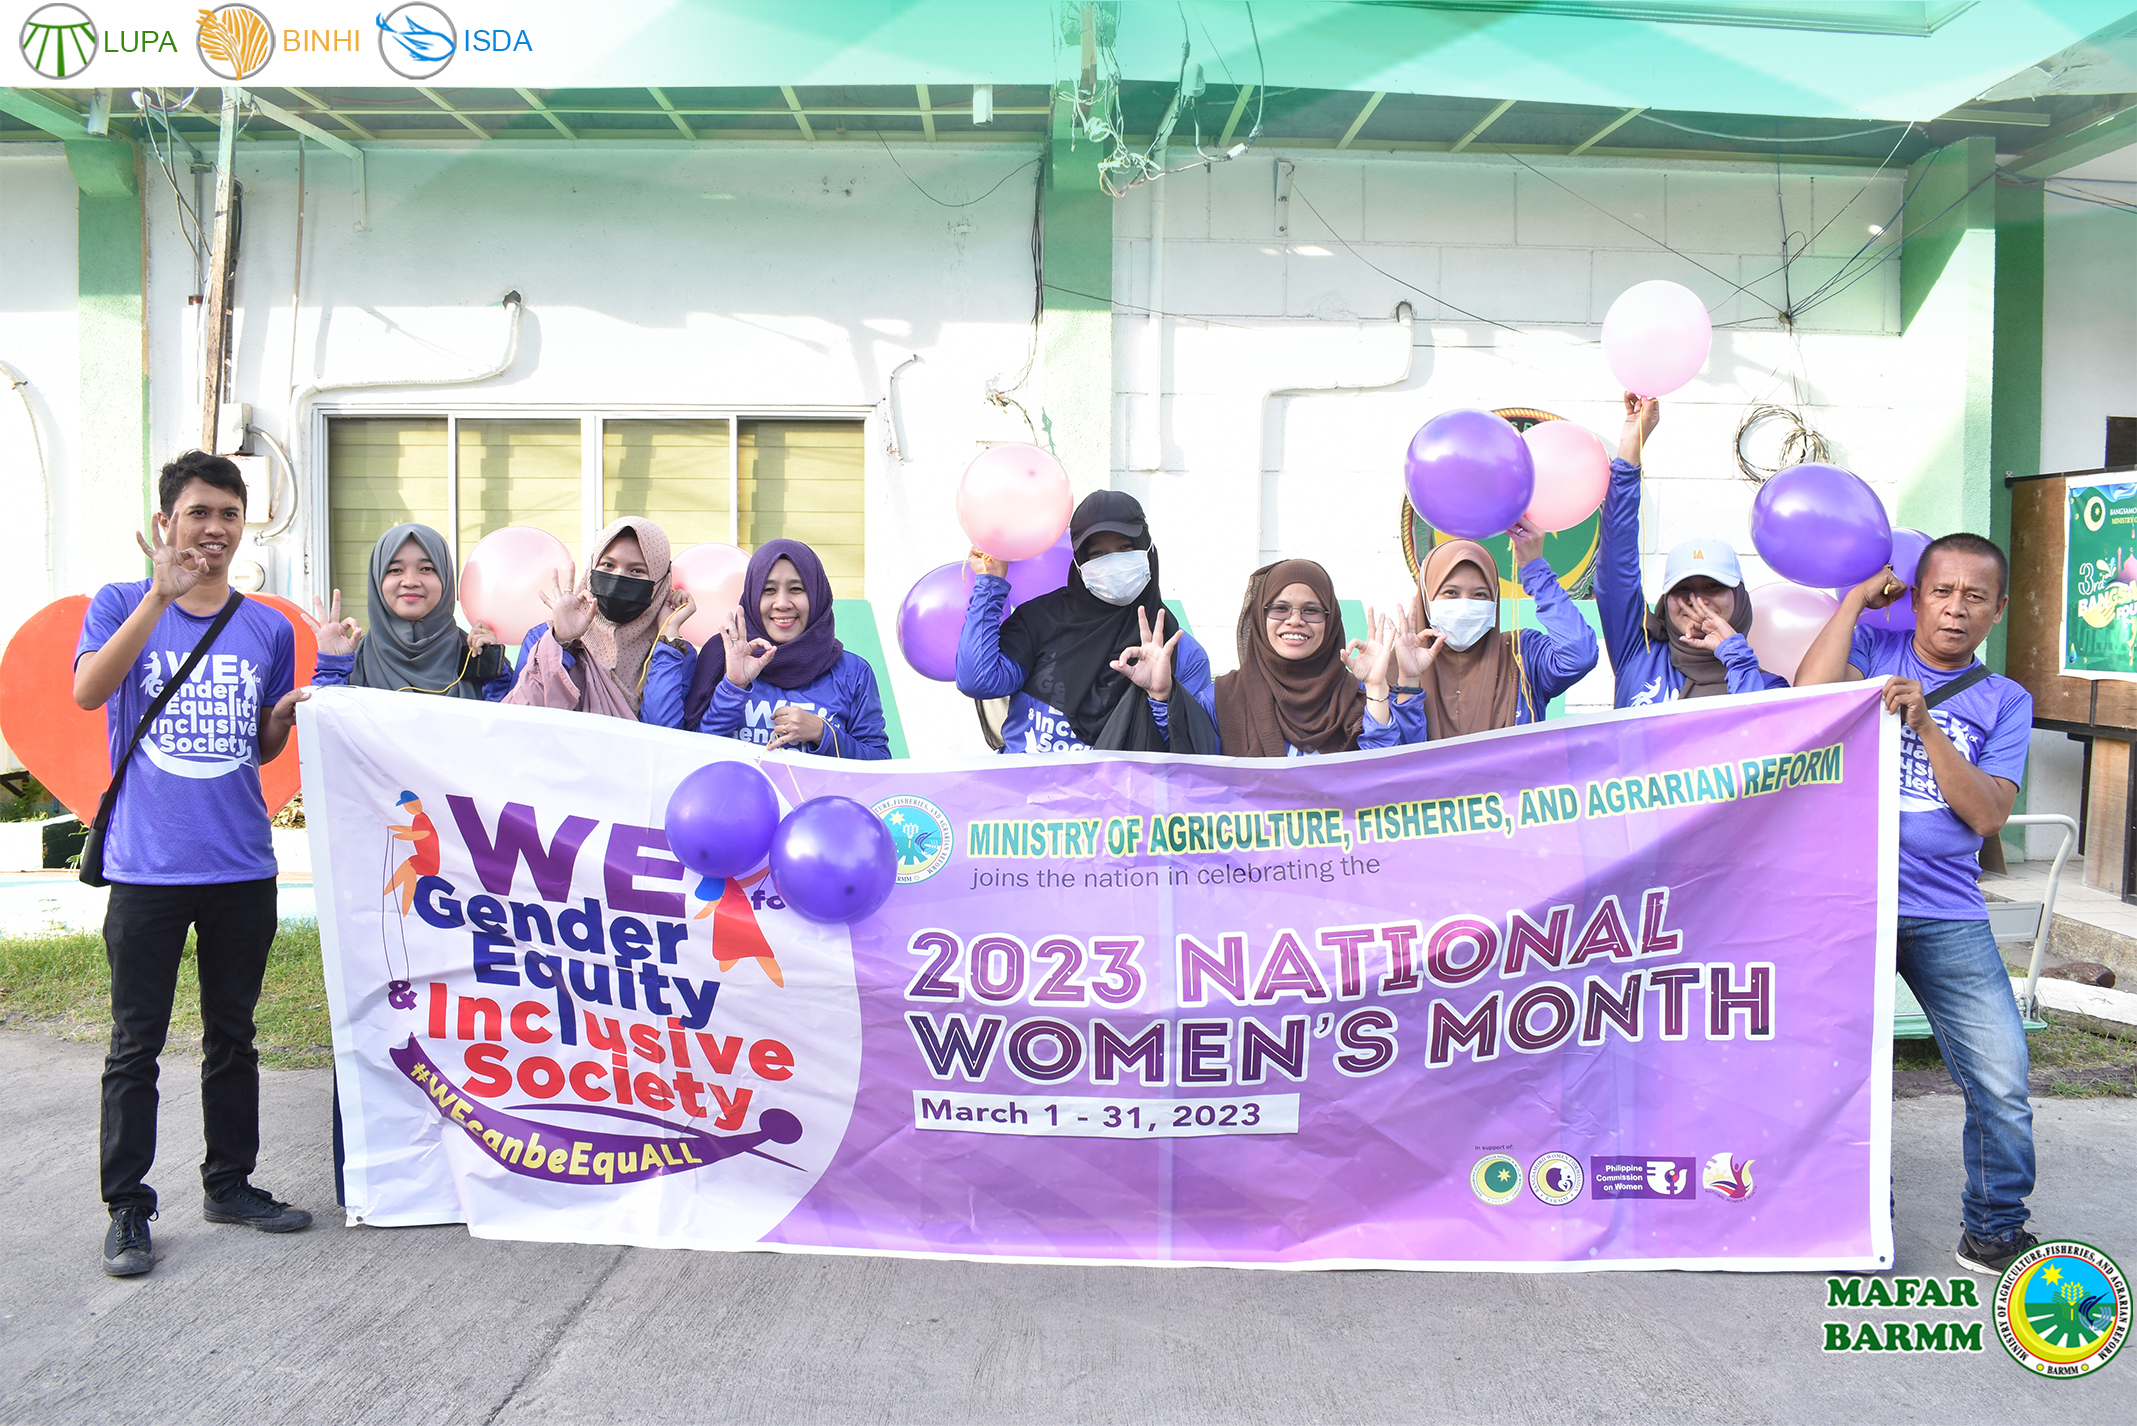 Kick-off ceremony to celebrate 2023 National Women’s Month